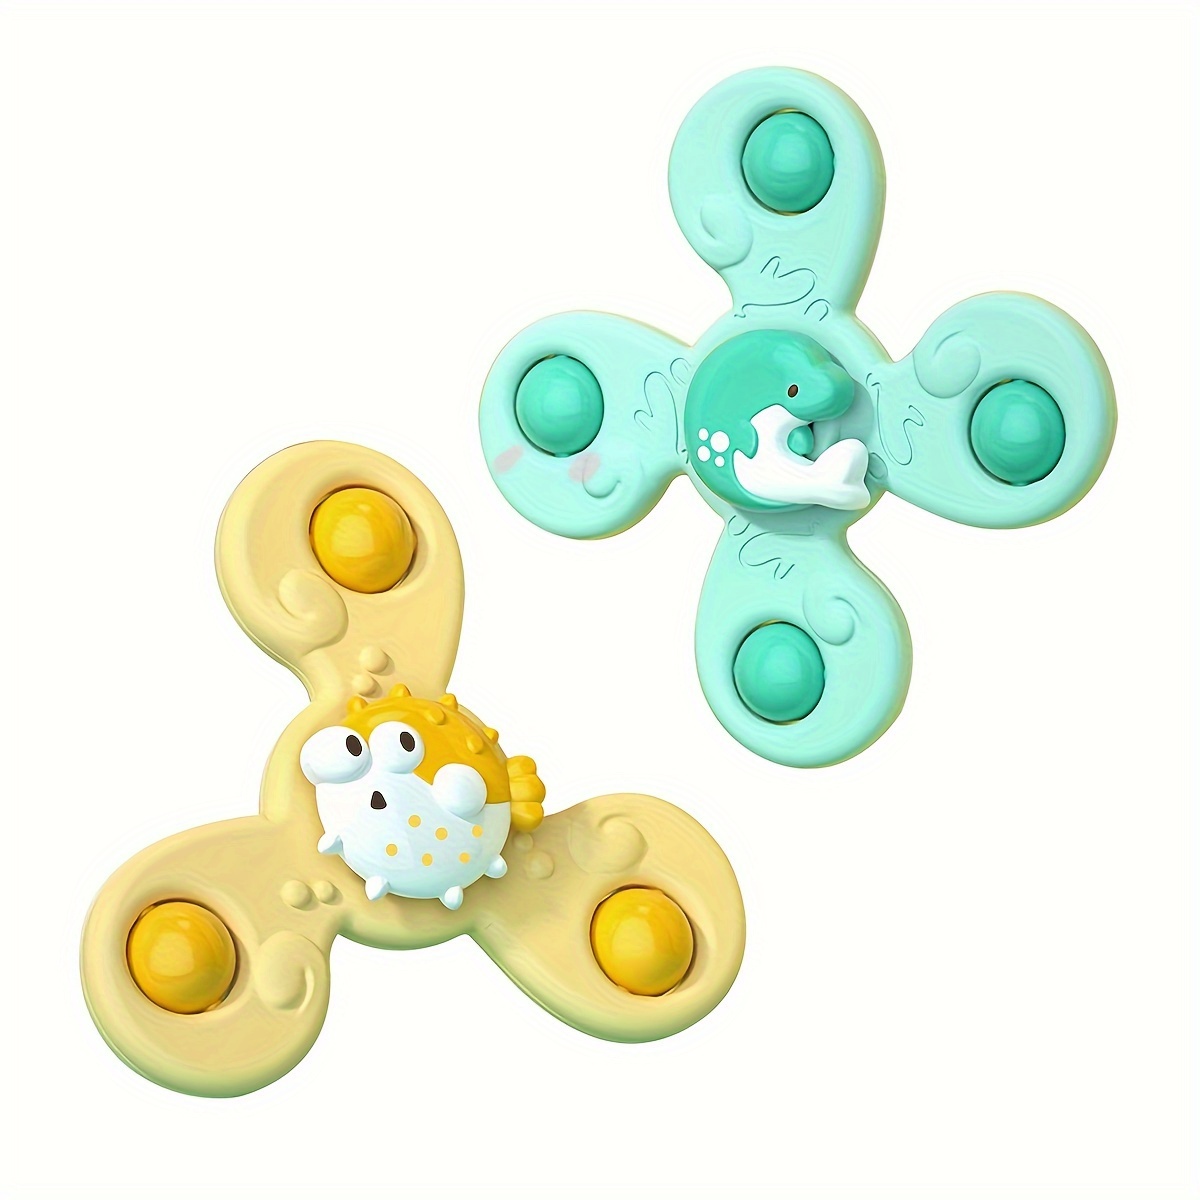 Suction Cup Spinner Infant Baby Toys 12-18 Months, Spinning Top Sensory  Toys for Toddlers 1-3 Year Old, Fidget Dimple Toy for babies, Christmas